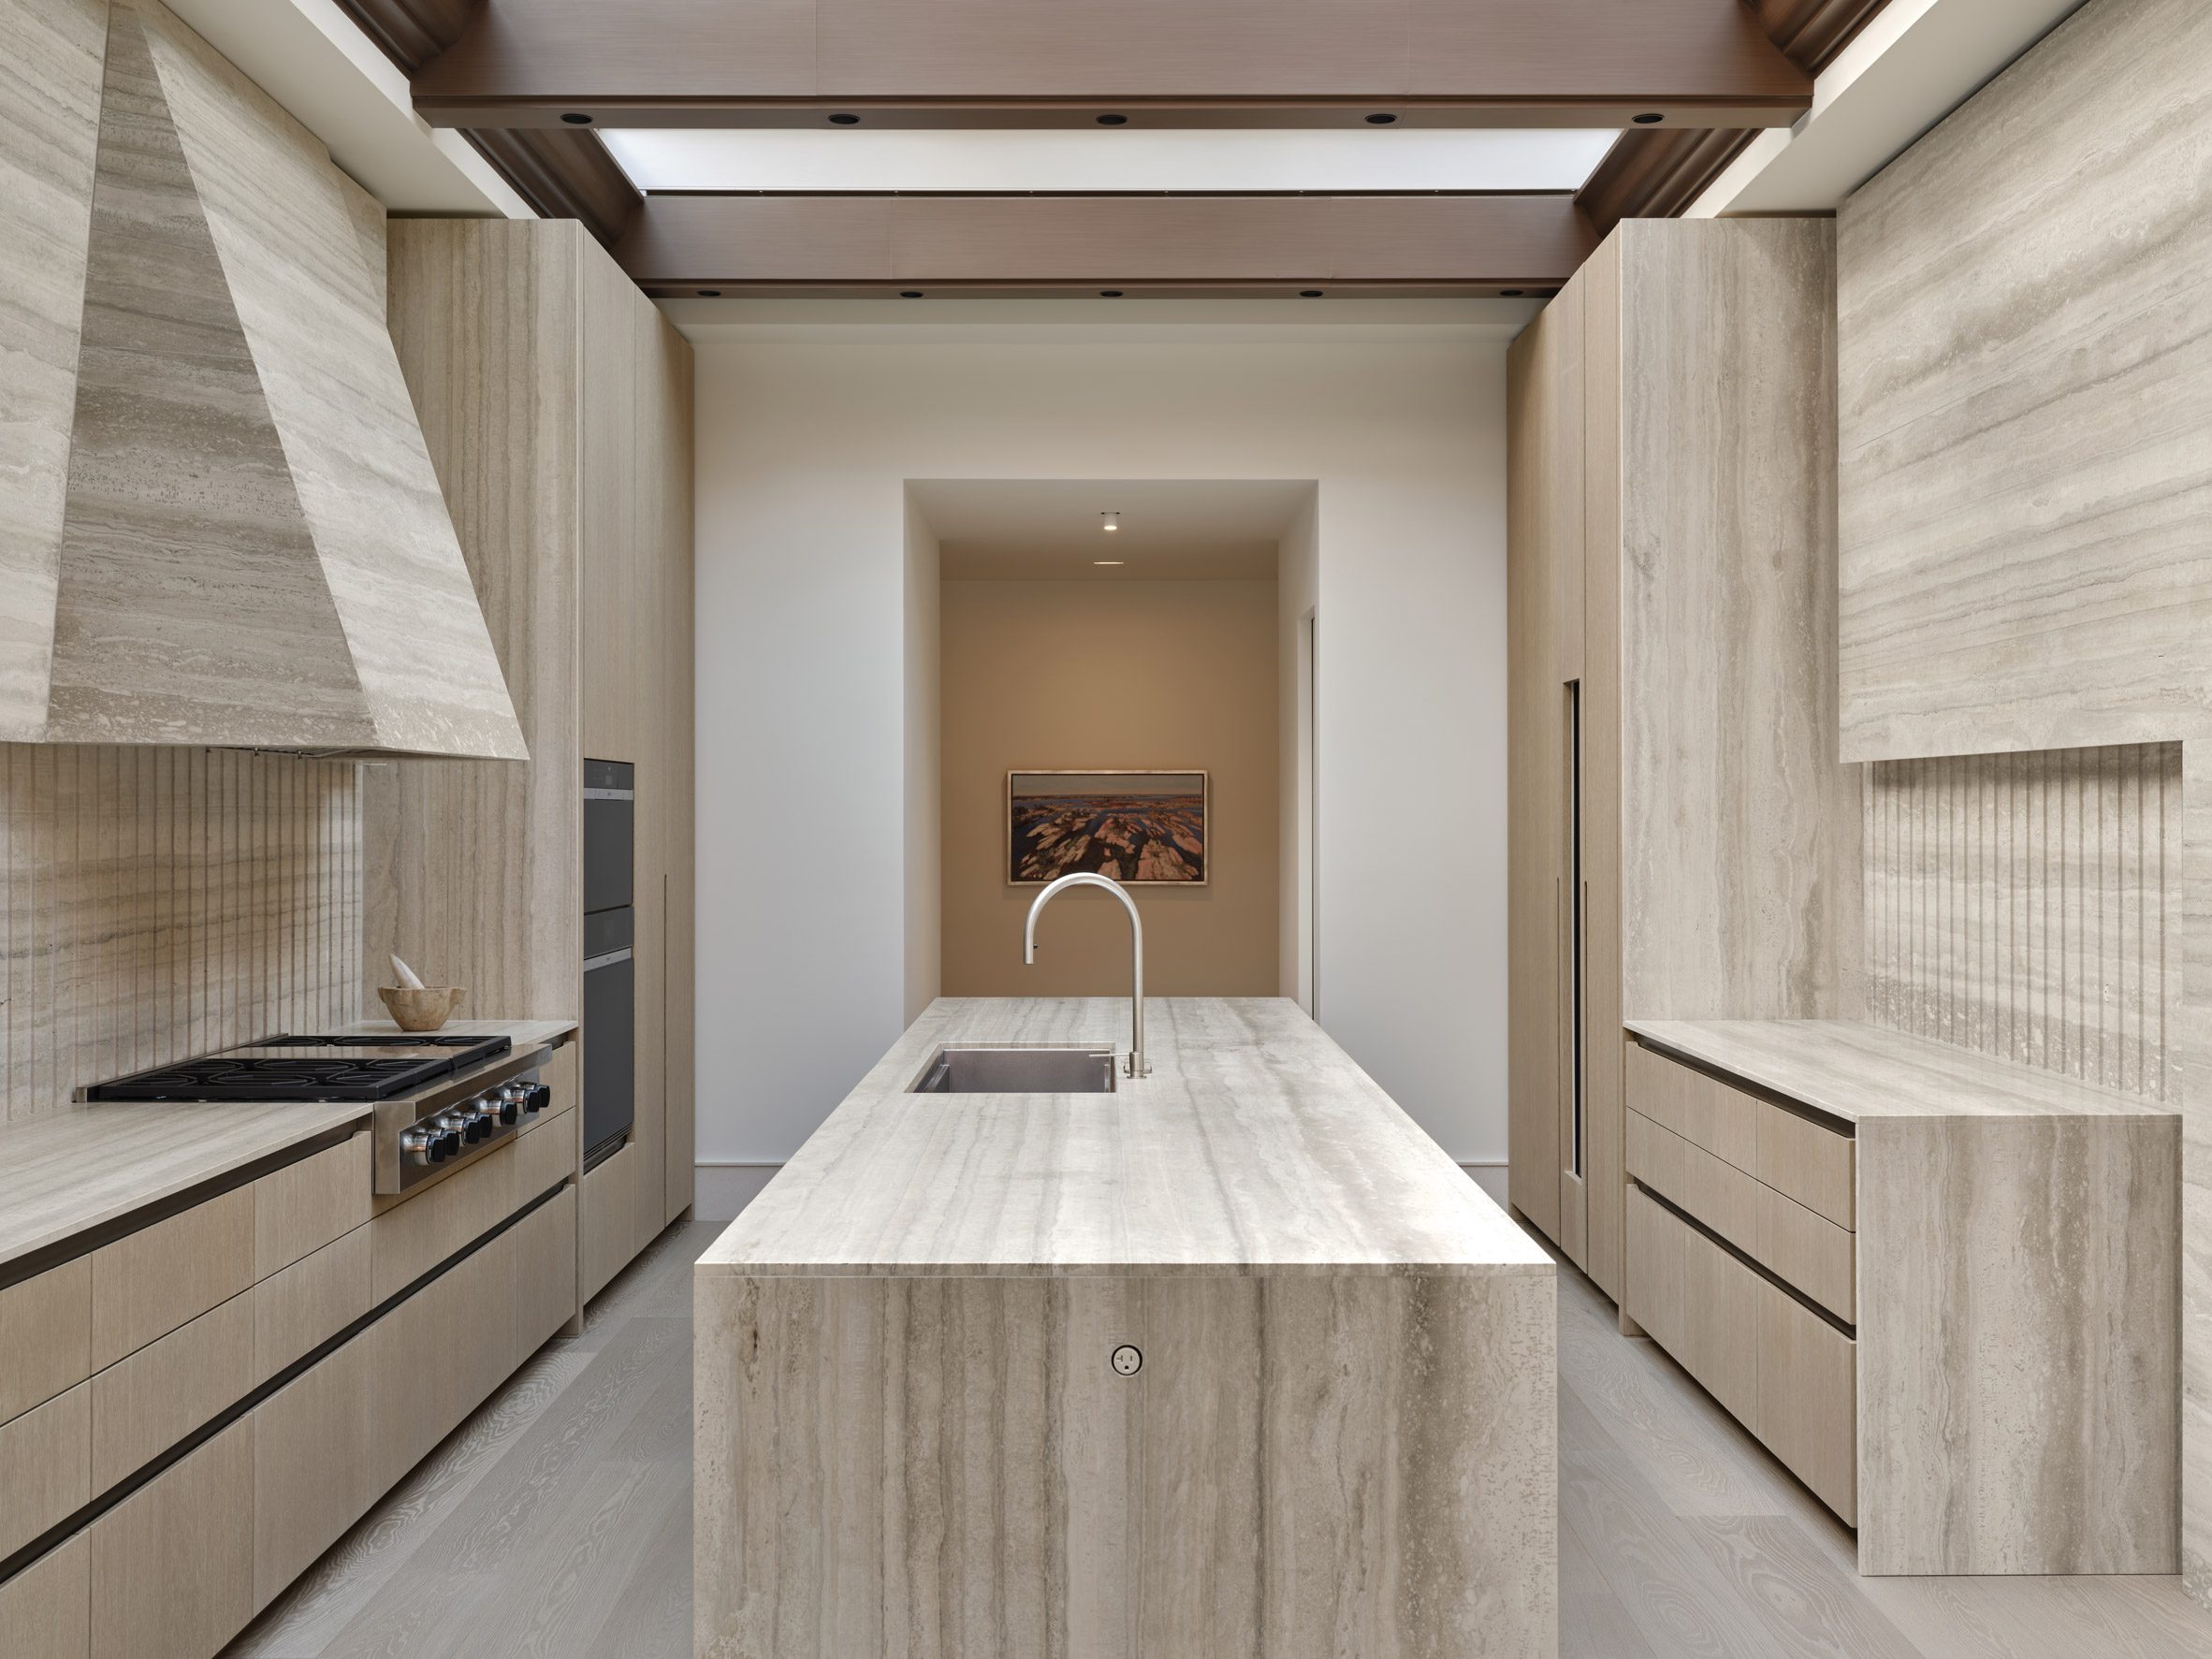 Travertine kitchen with a long island in the centre